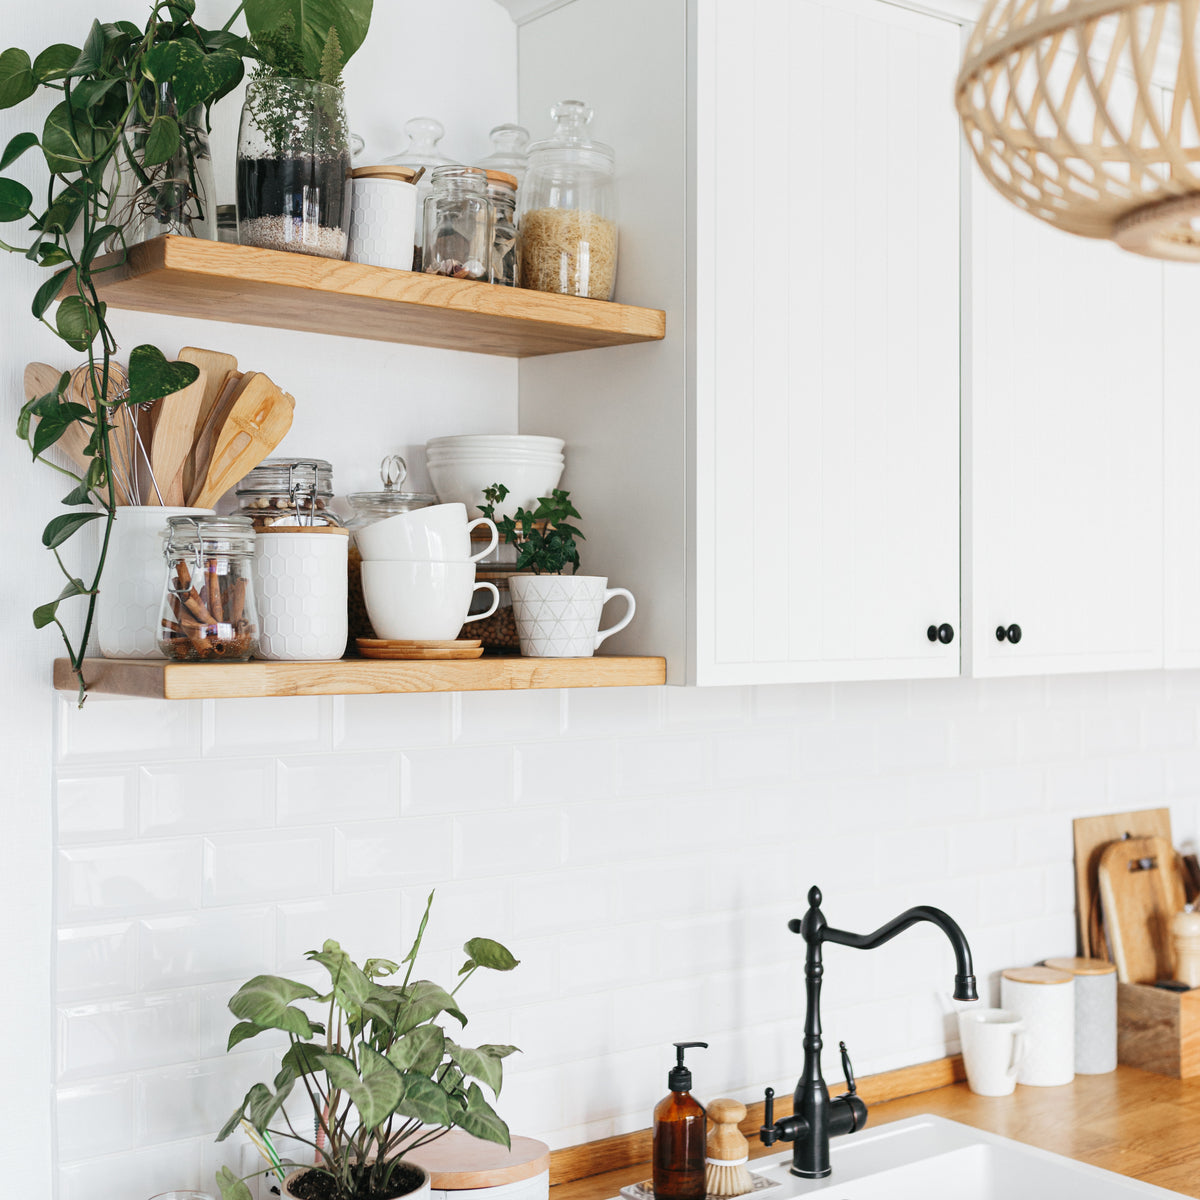 8 Great Ways to Decorate with Planters in Your Kitchen Design